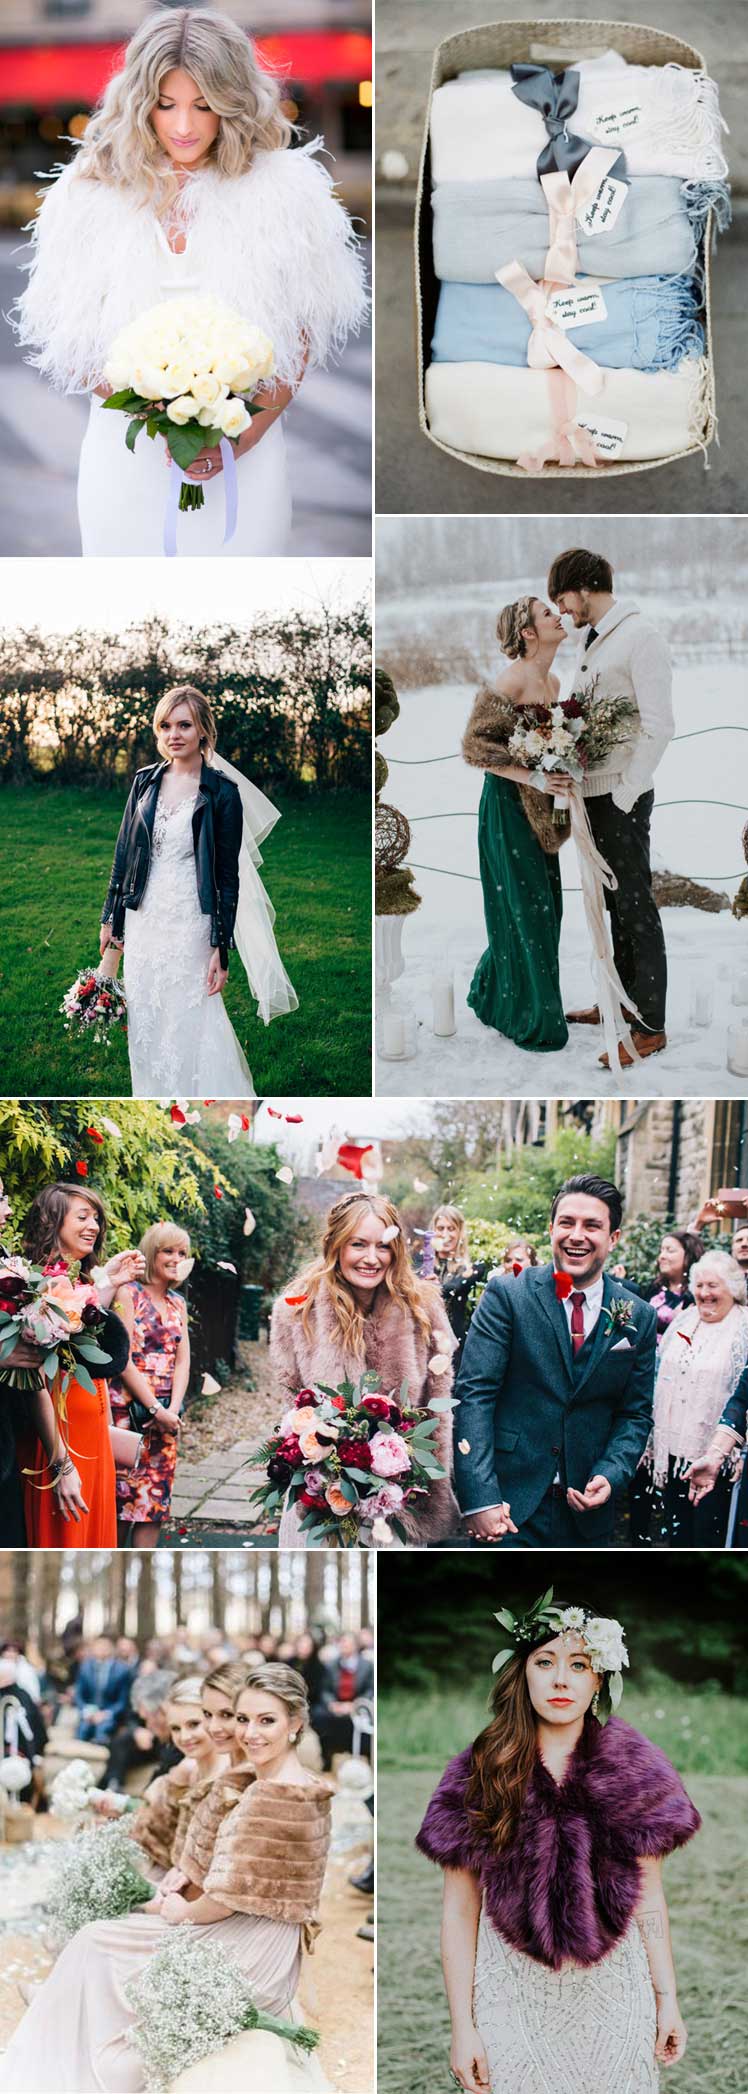 How to keep warm on your winter wedding day